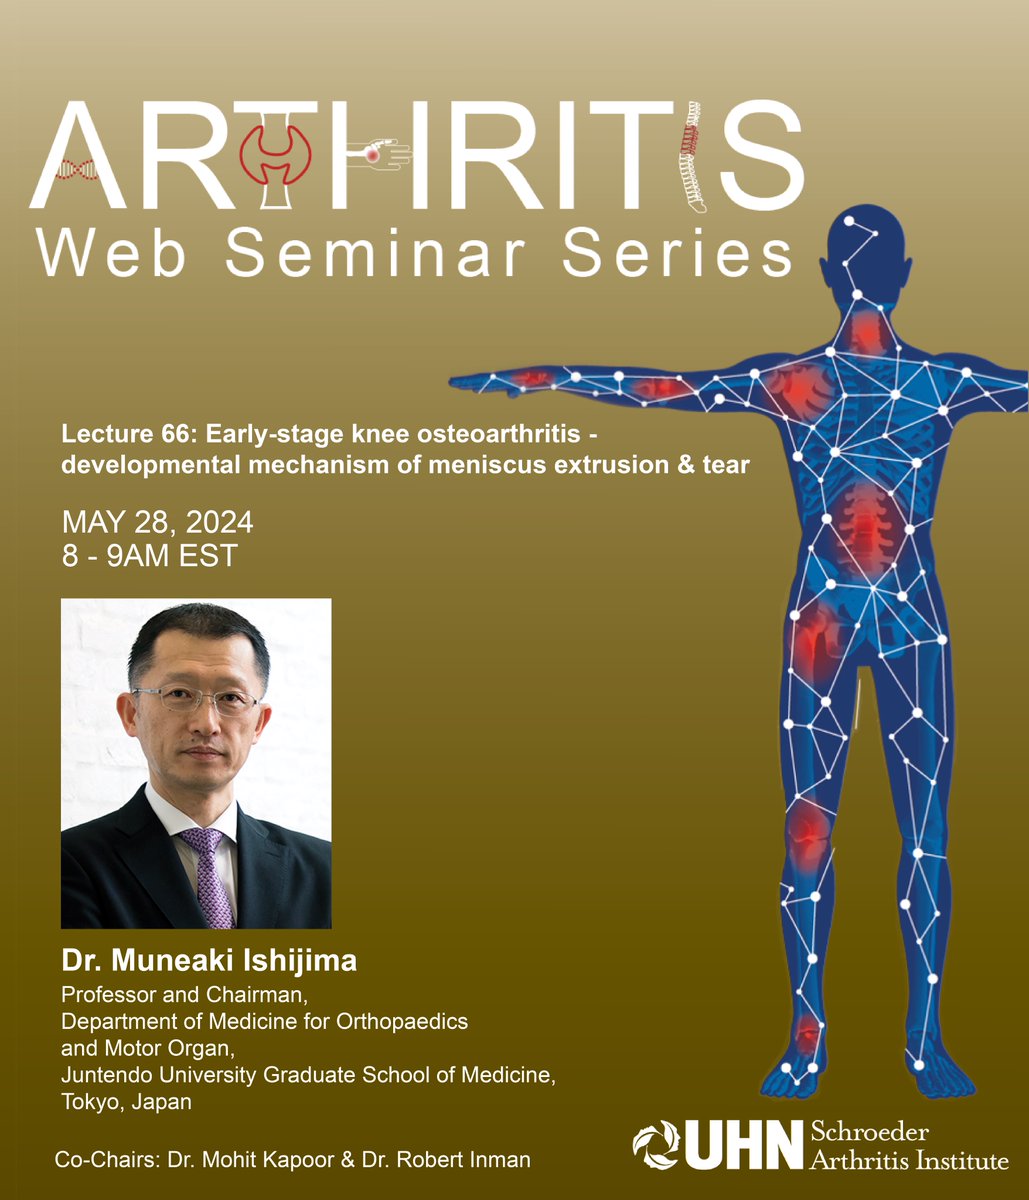 Join our next #Arthritis Web Seminar Series Lecture on MAY 28, at 8am, by Dr. Muneaki Ishijima, Professor & Chairman of the Department of Medicine for Orthopedics and Motor Organ @juntendo_univ, presenting on “Early-stage knee #osteoarthritis - developmental mechanism of meniscus